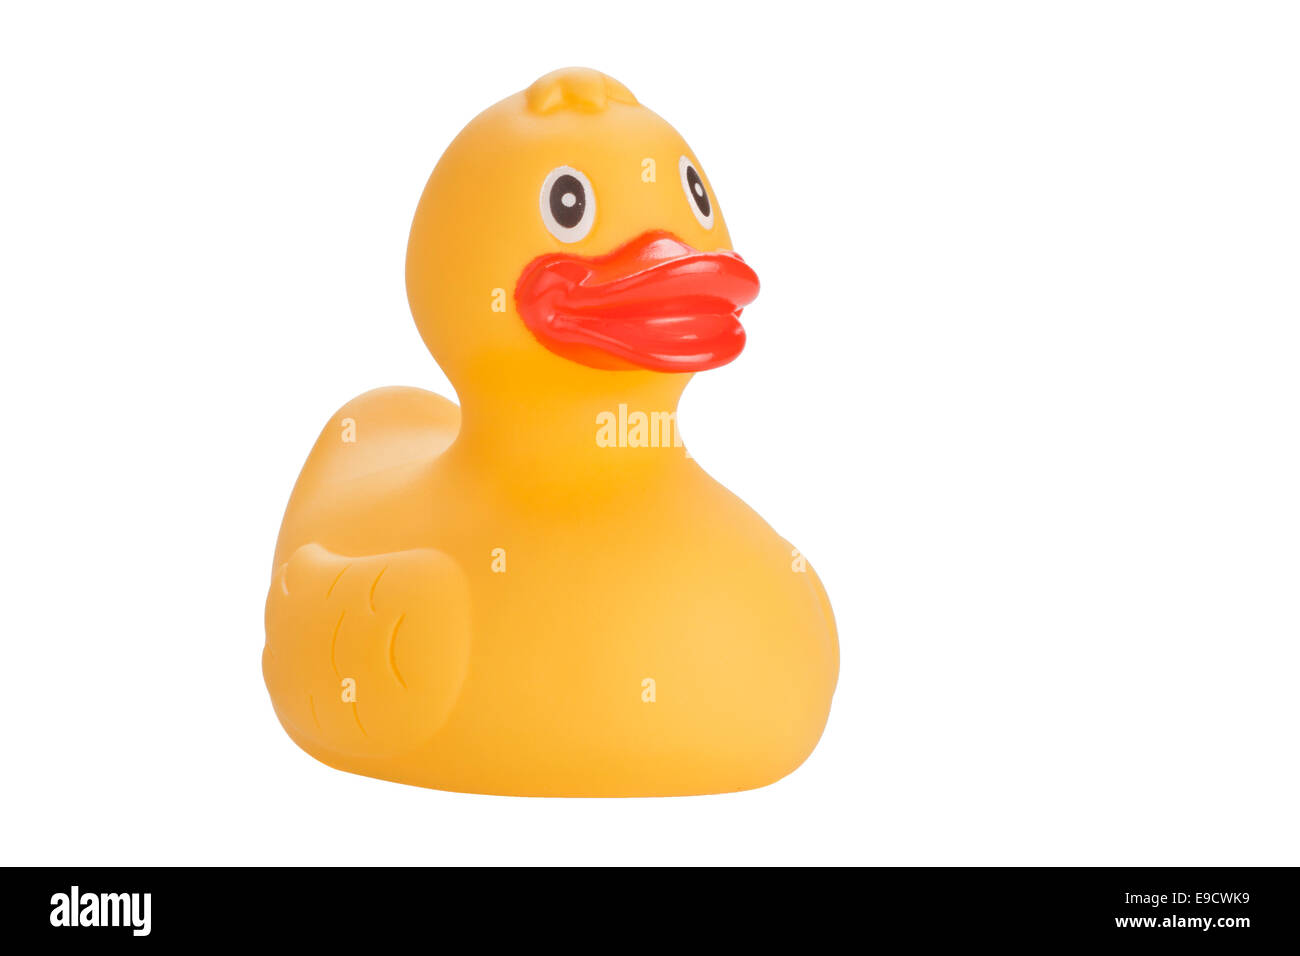 Yellow duck isolated on white background Stock Photo